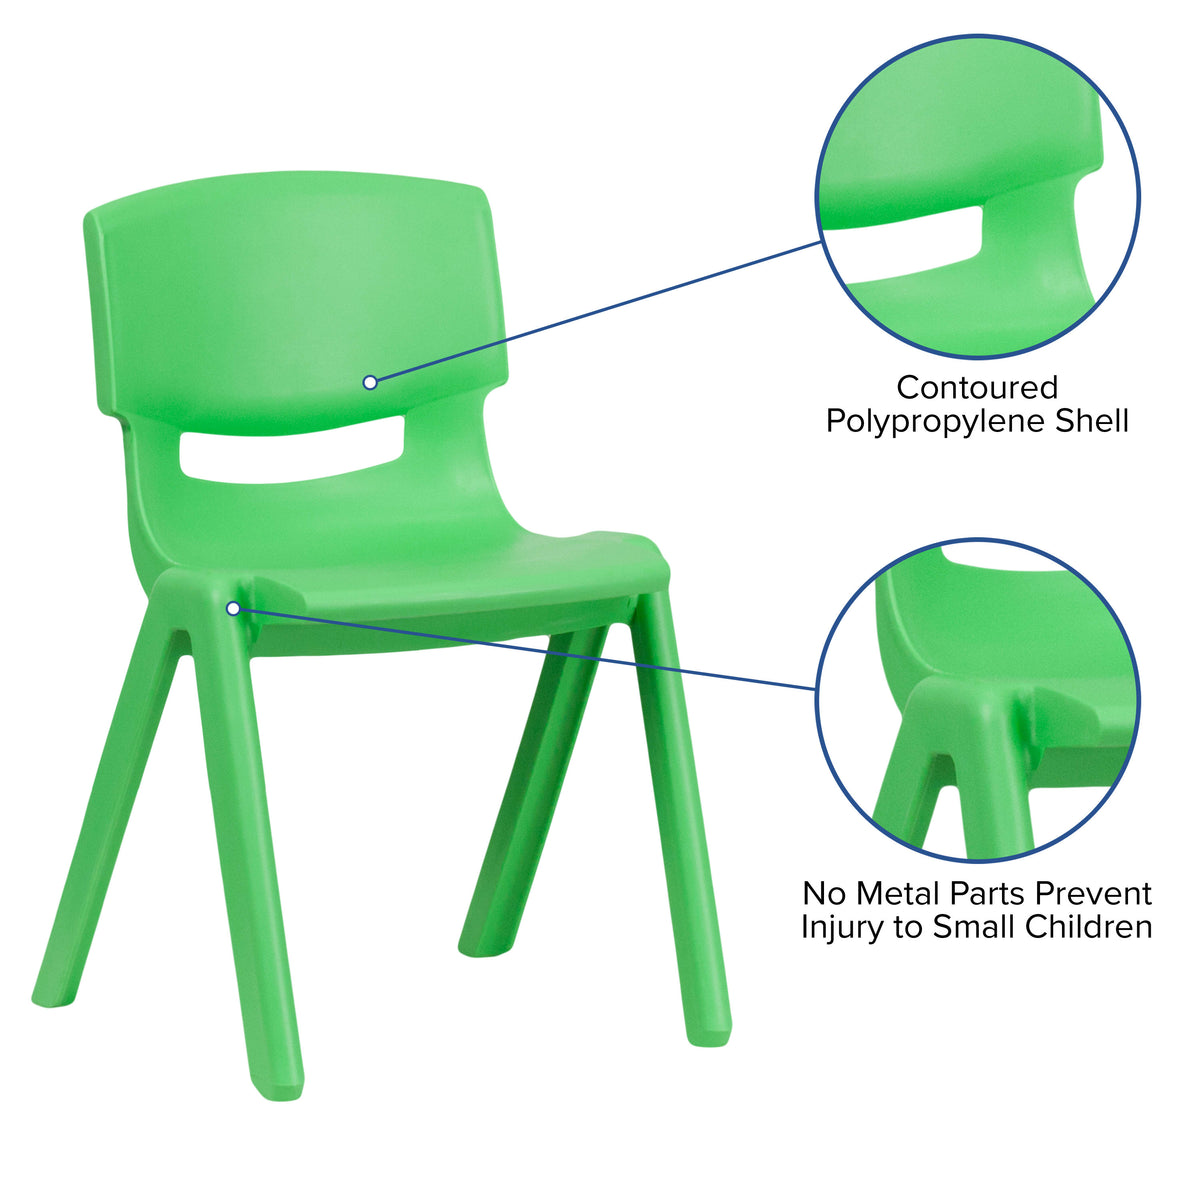 Green |#| 2 Pack Green Plastic Stackable School Chair with 15.5inchH Seat